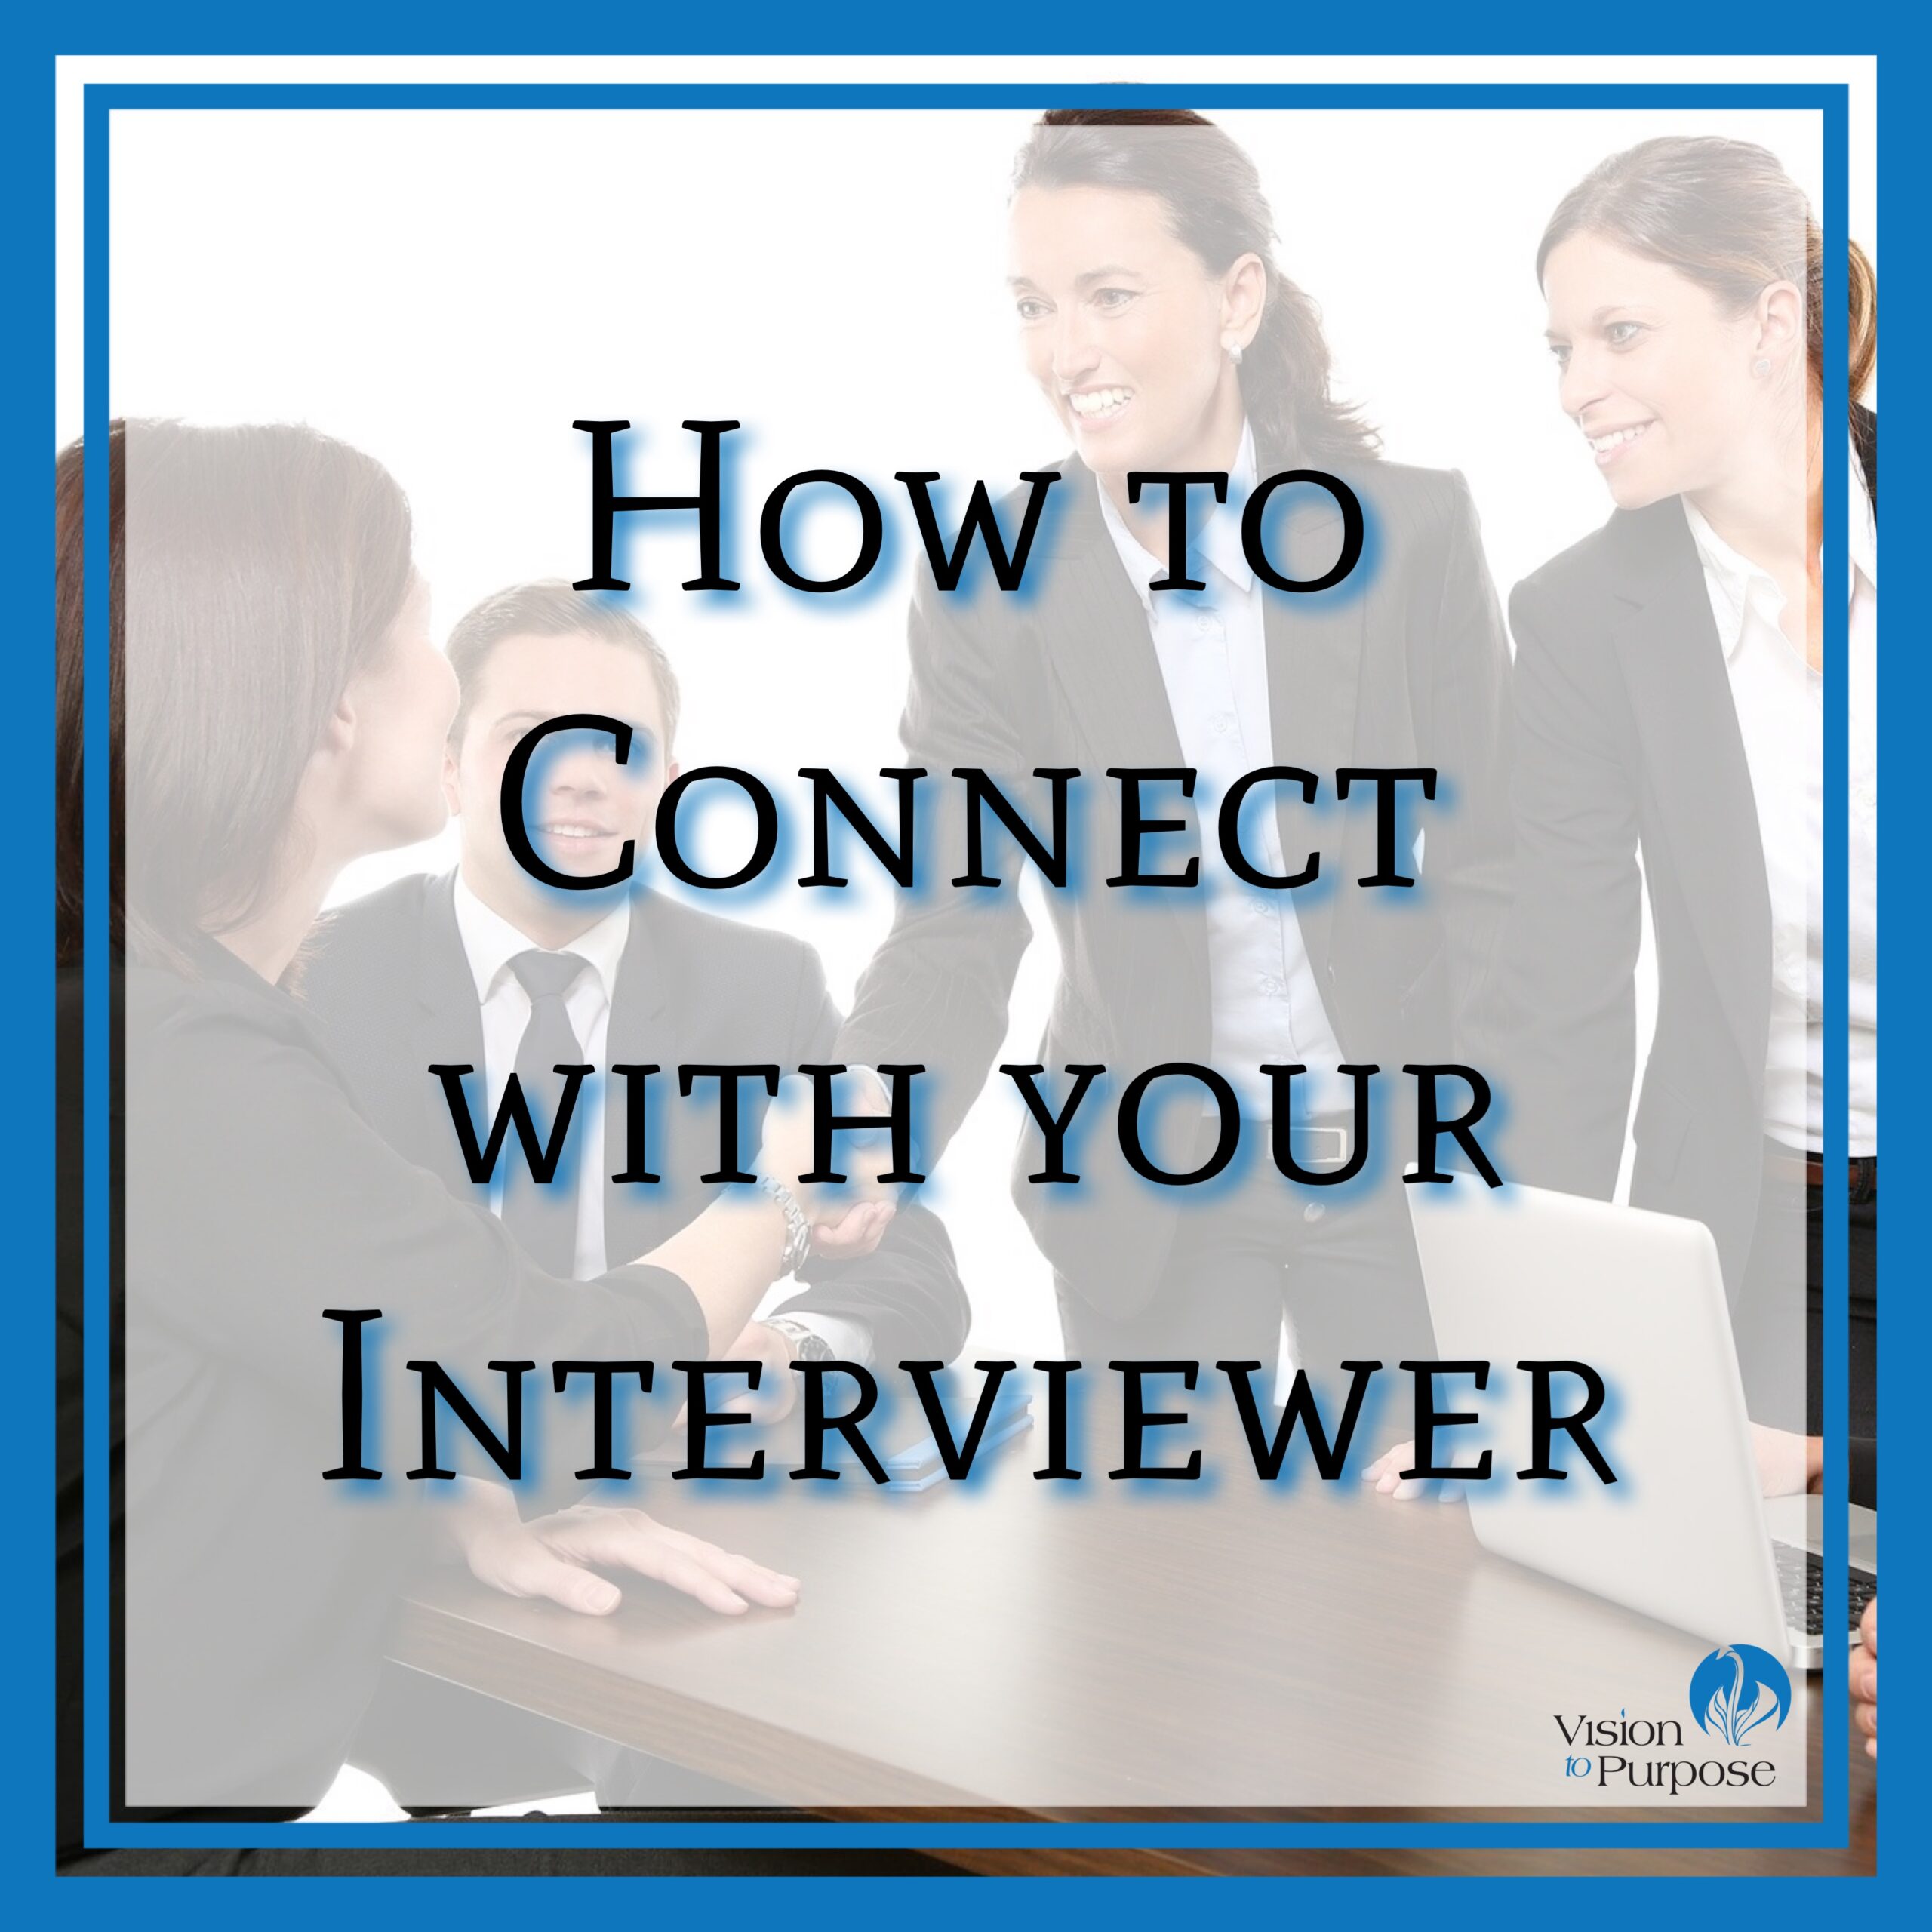 How to Connect with Your Interviewer